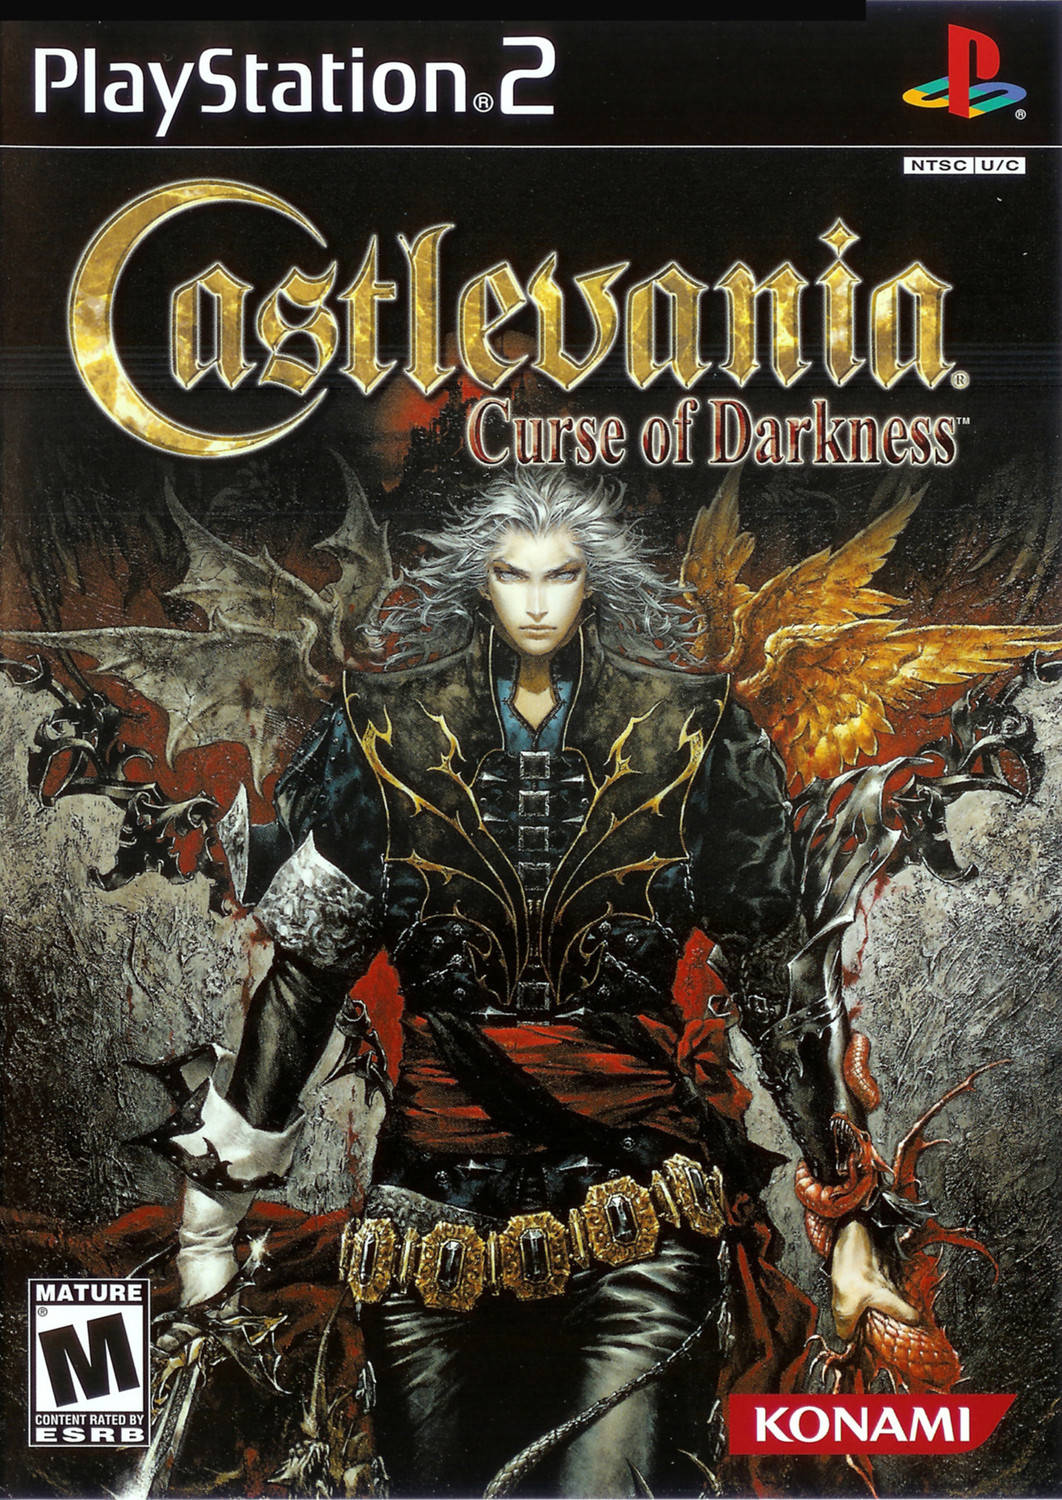 castlevania-curse-of-darkness-playstation-2-ps2-game